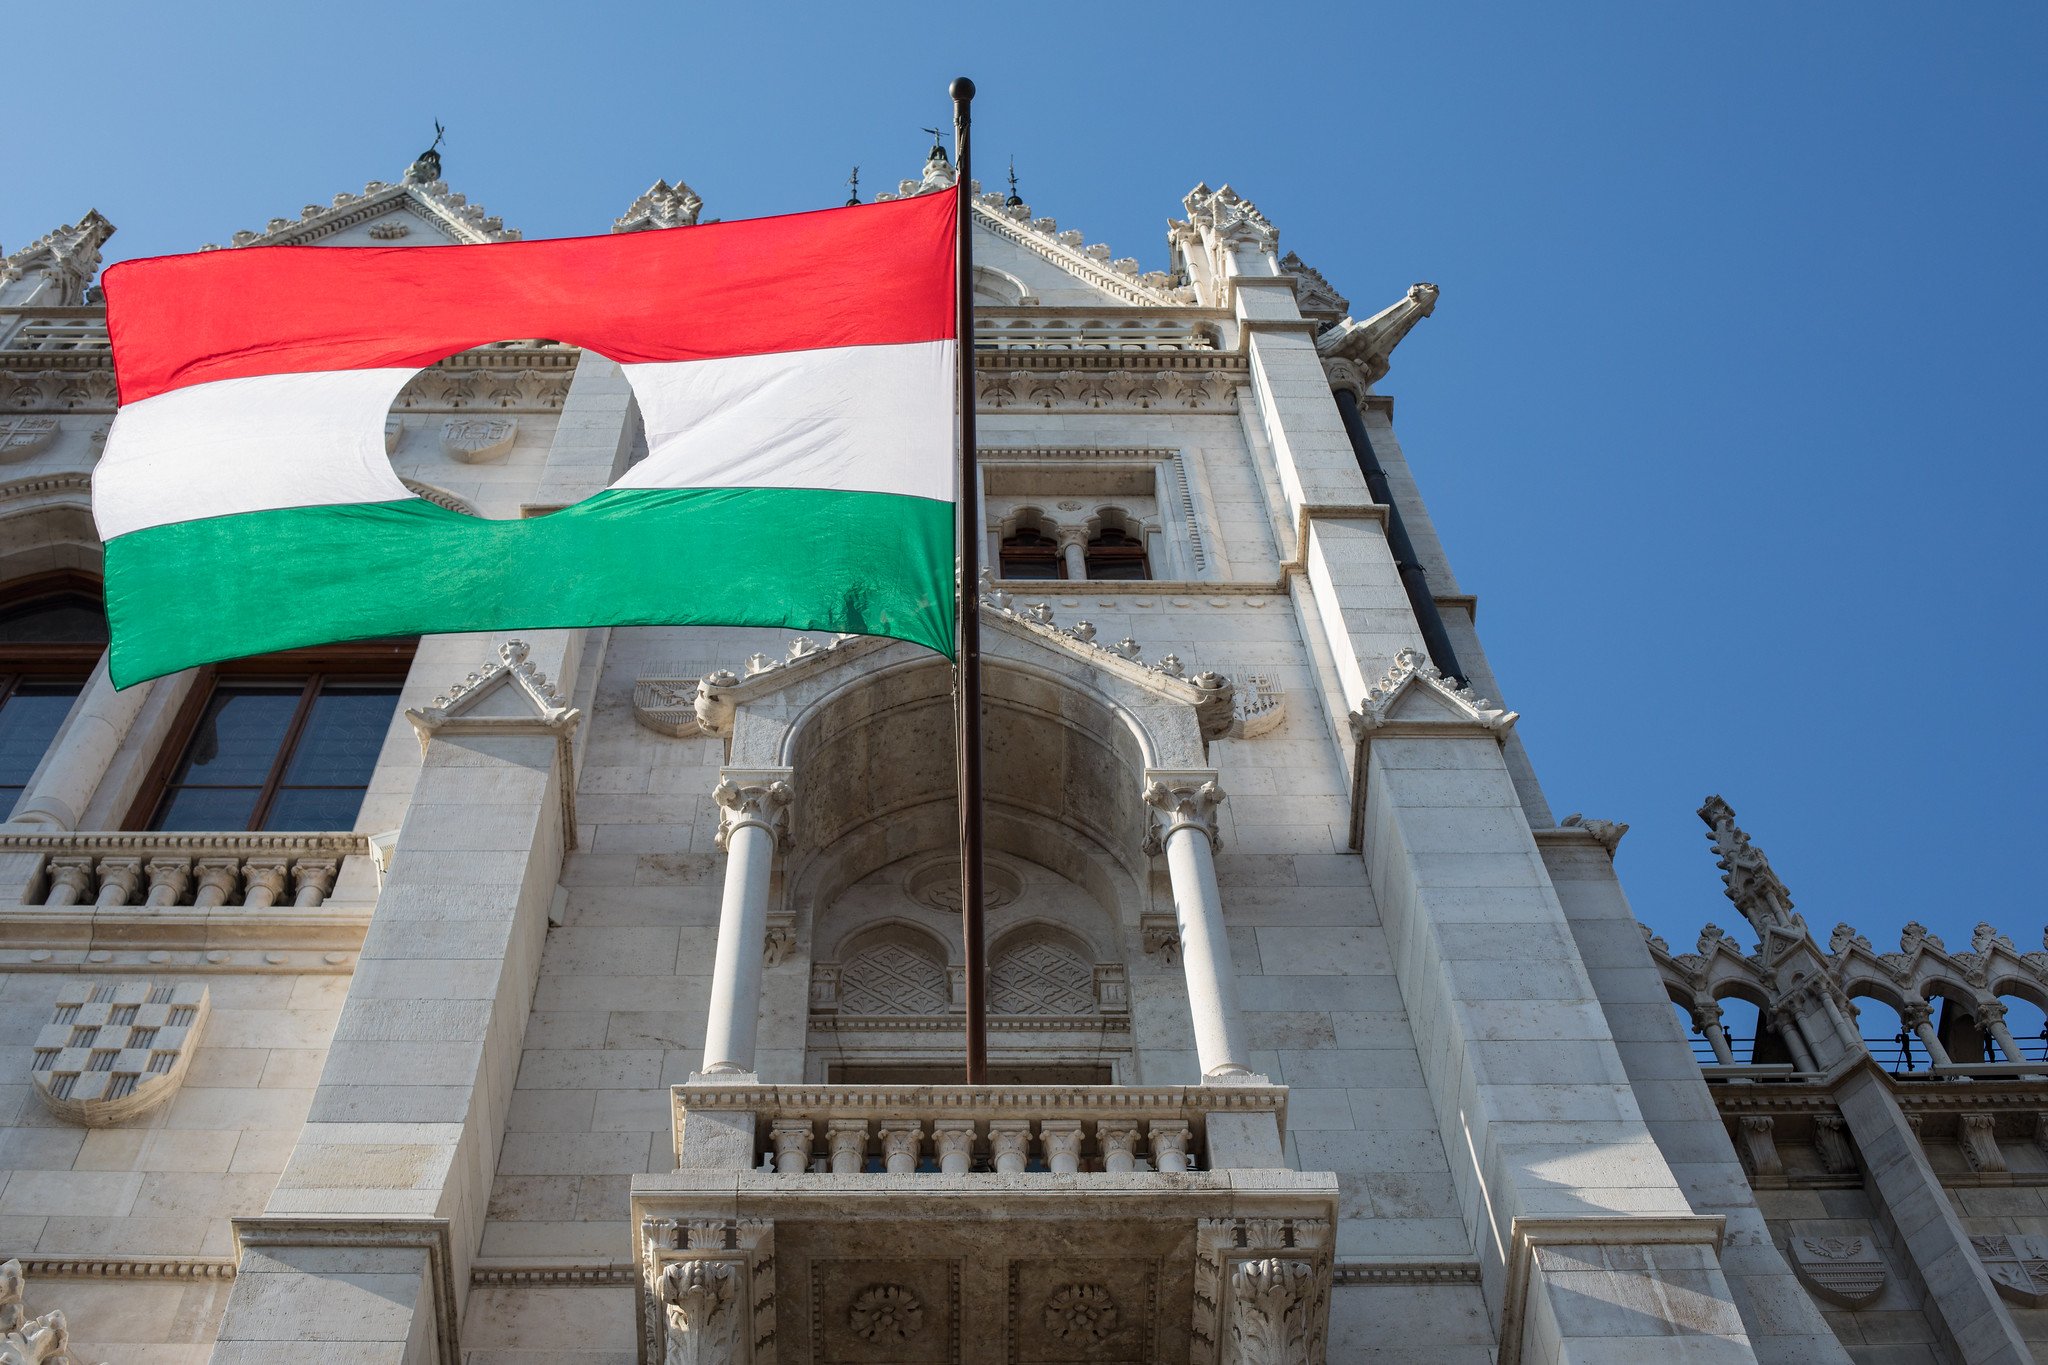 October 23, the Hungarian Revolution of 1956, and their flag with the hole in the centre